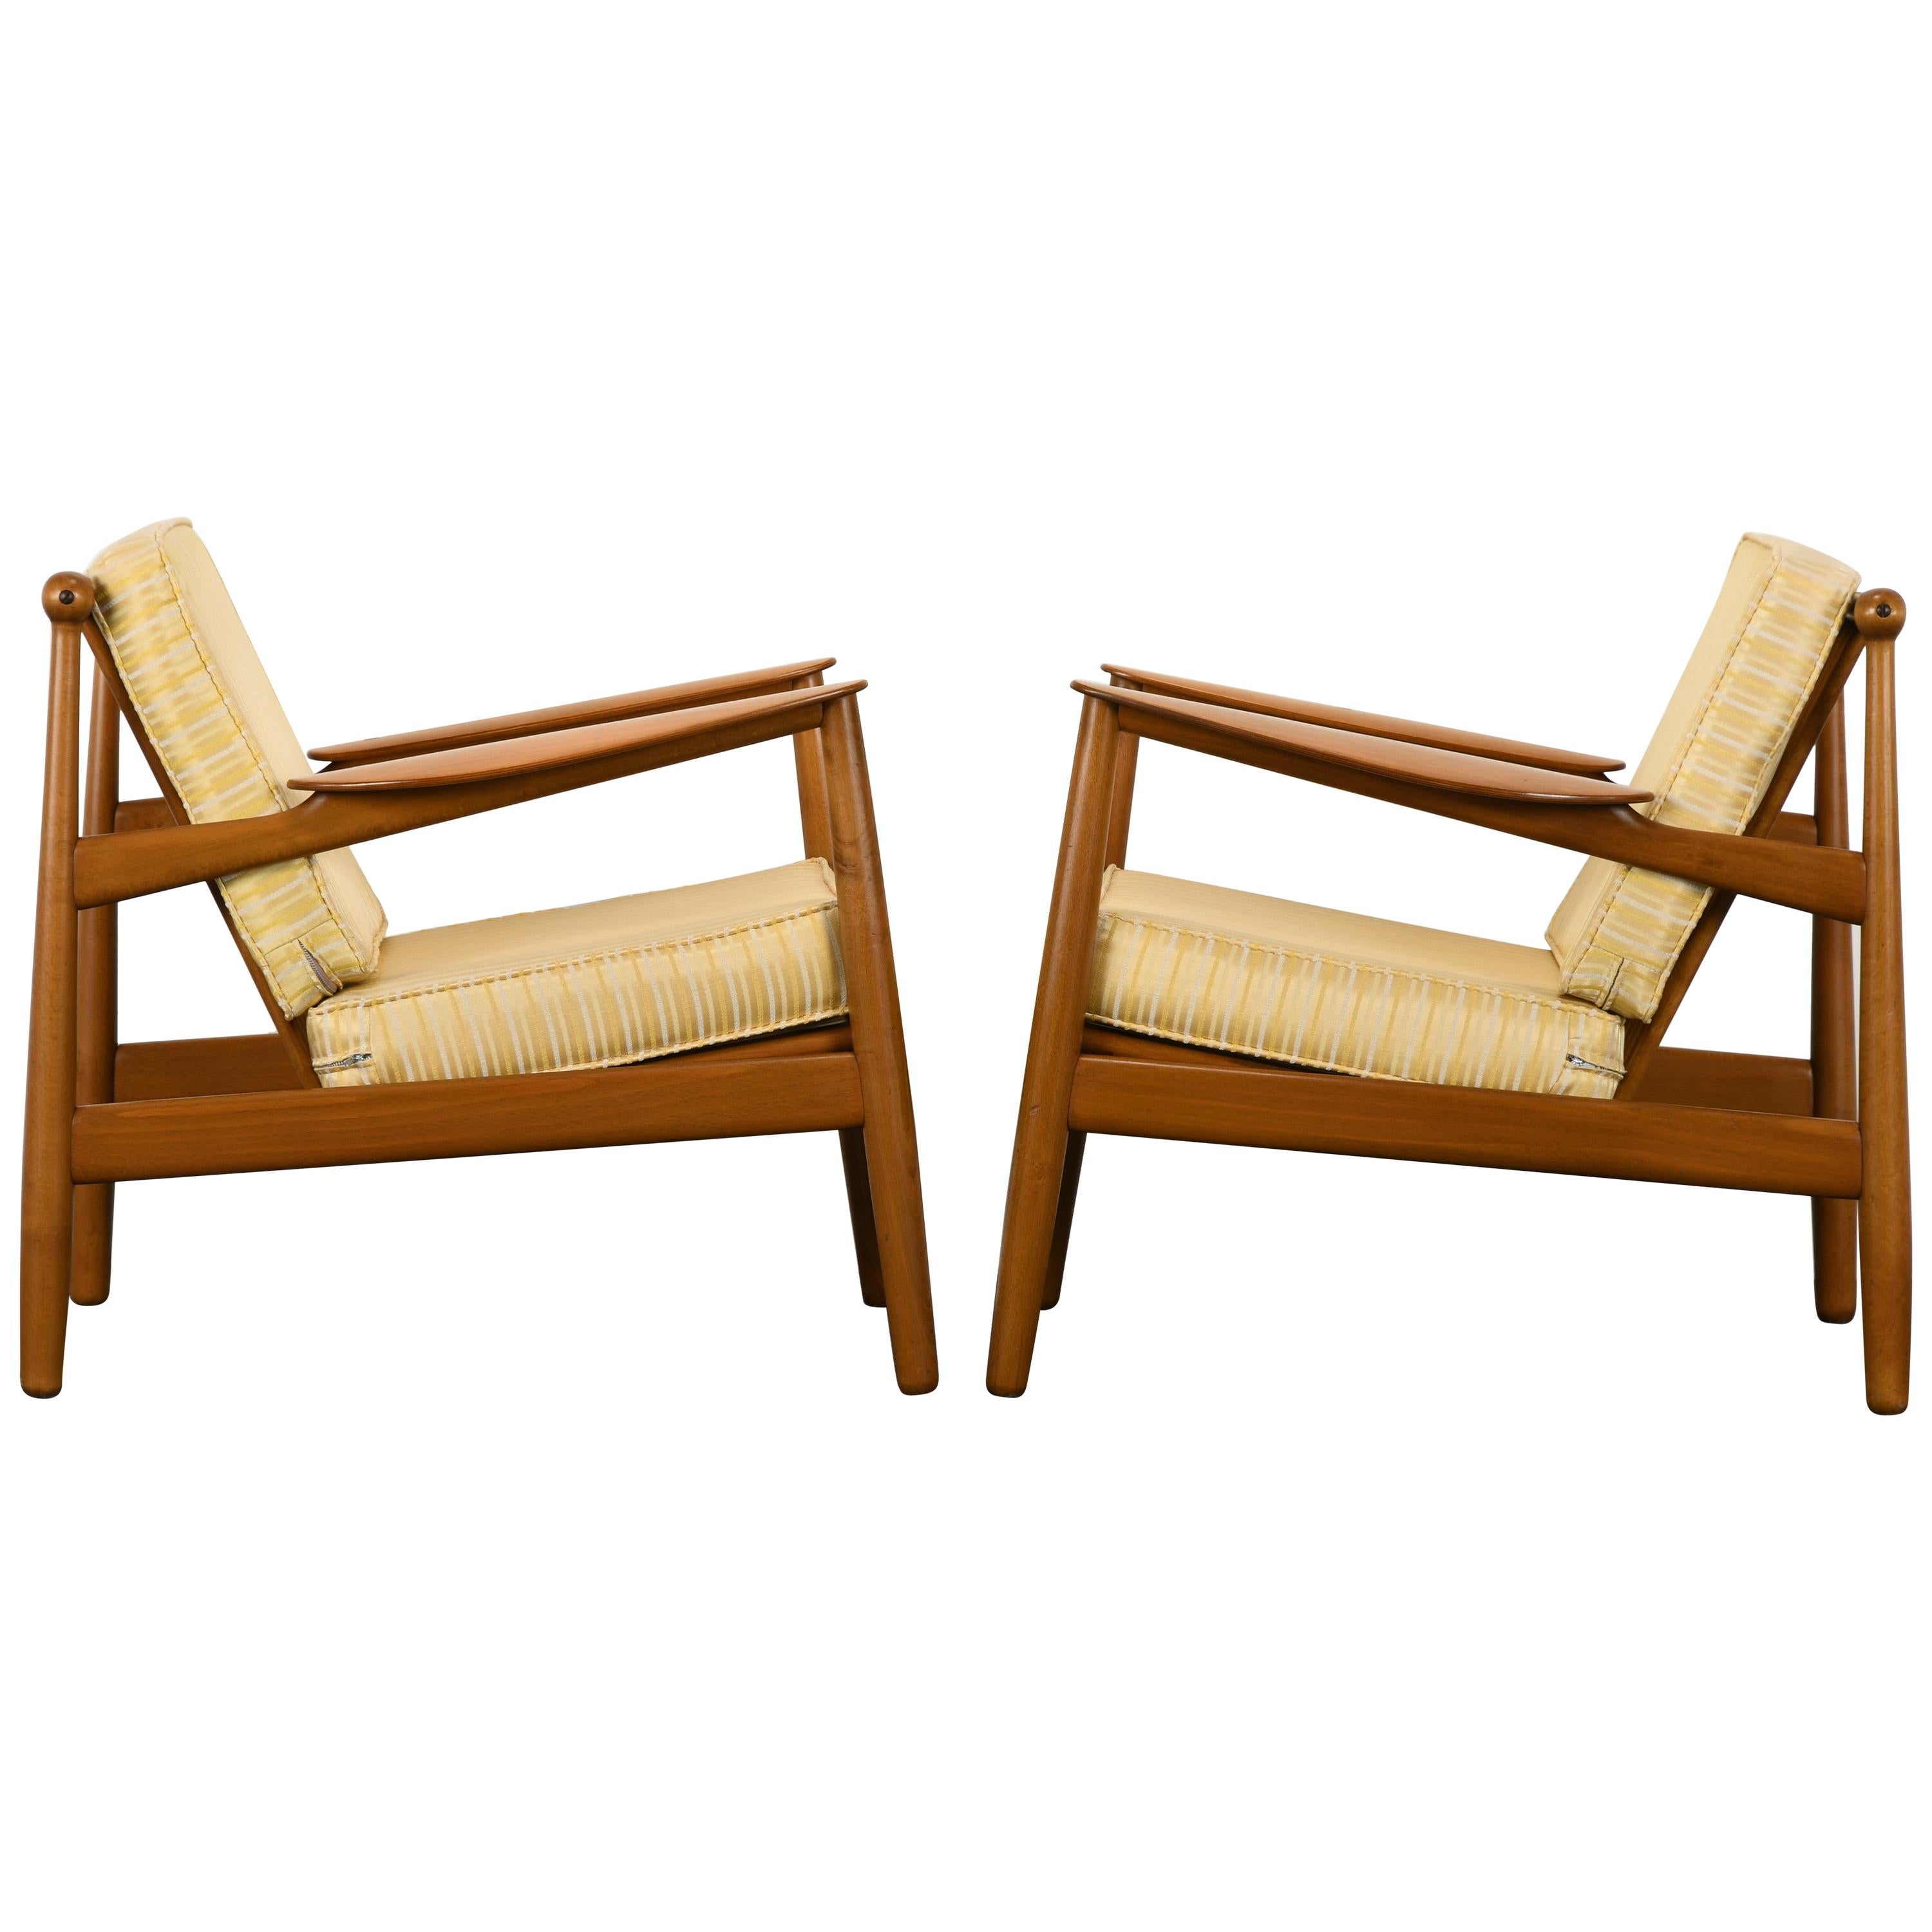 Pair of Danish Modern Chairs by P. Jeppesen, 1955